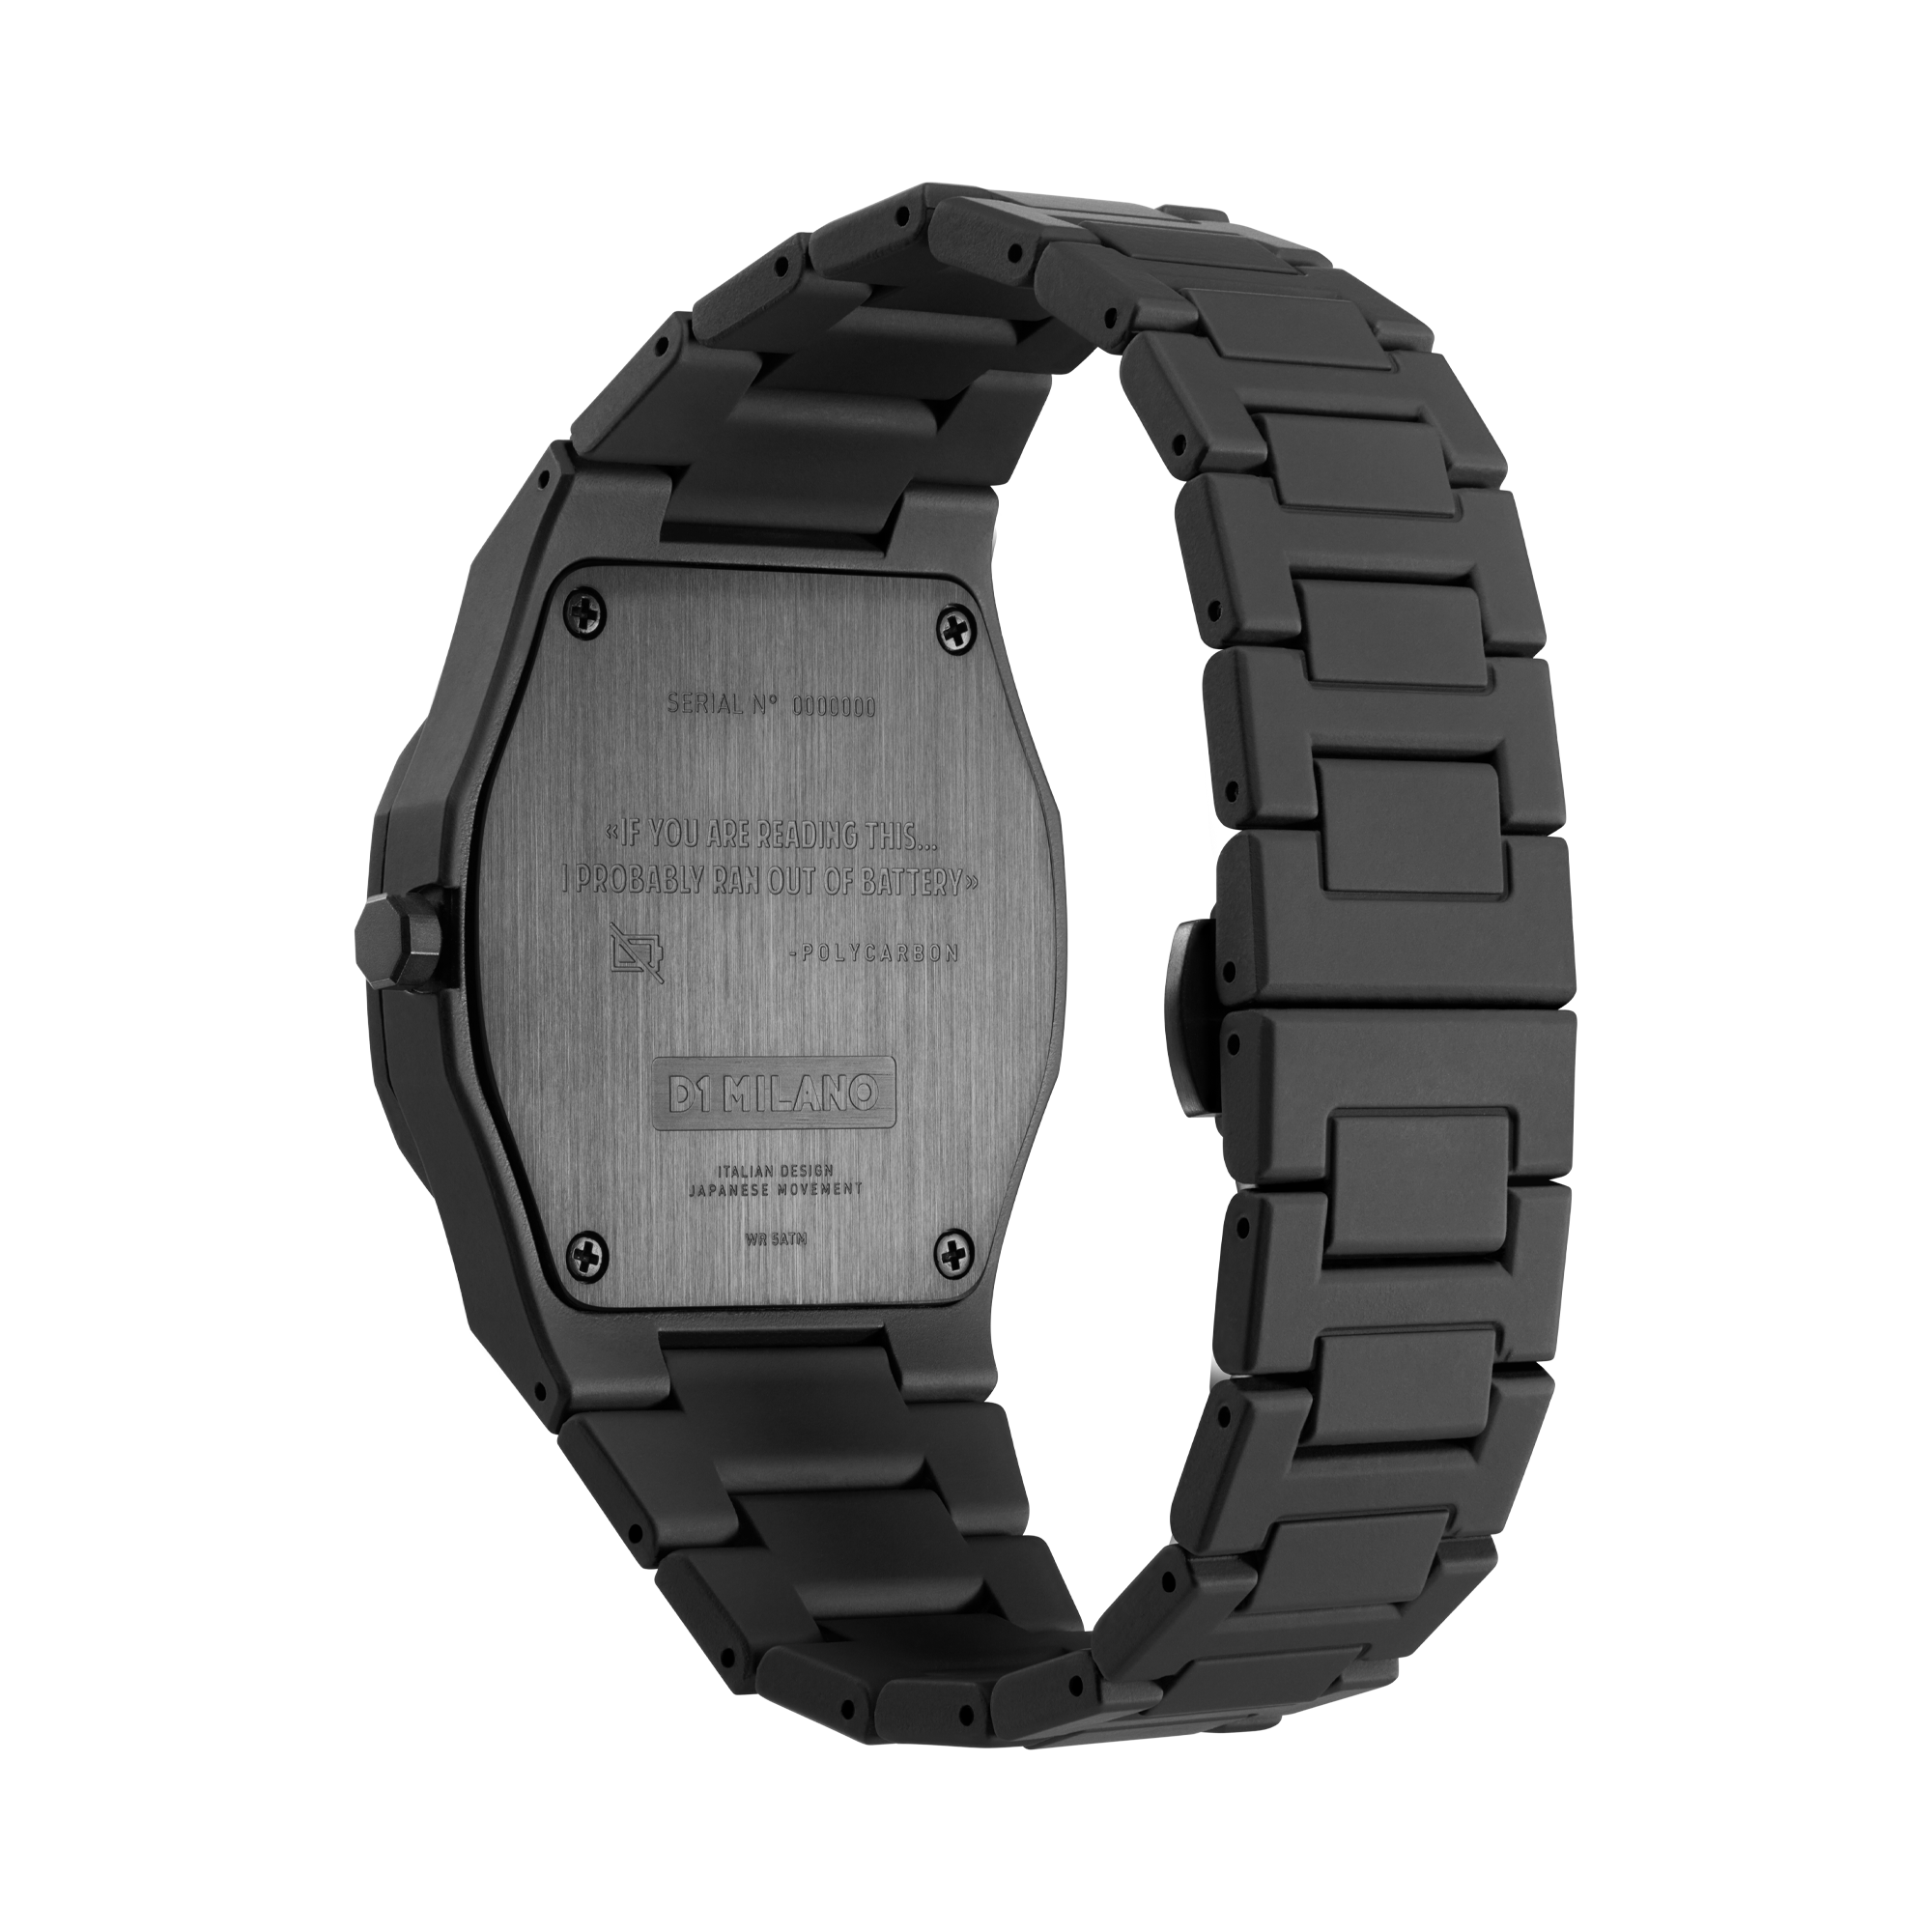 Unisex Poly Fly Poly-Carbon Watch D1-PCBJ26 D1 Milano